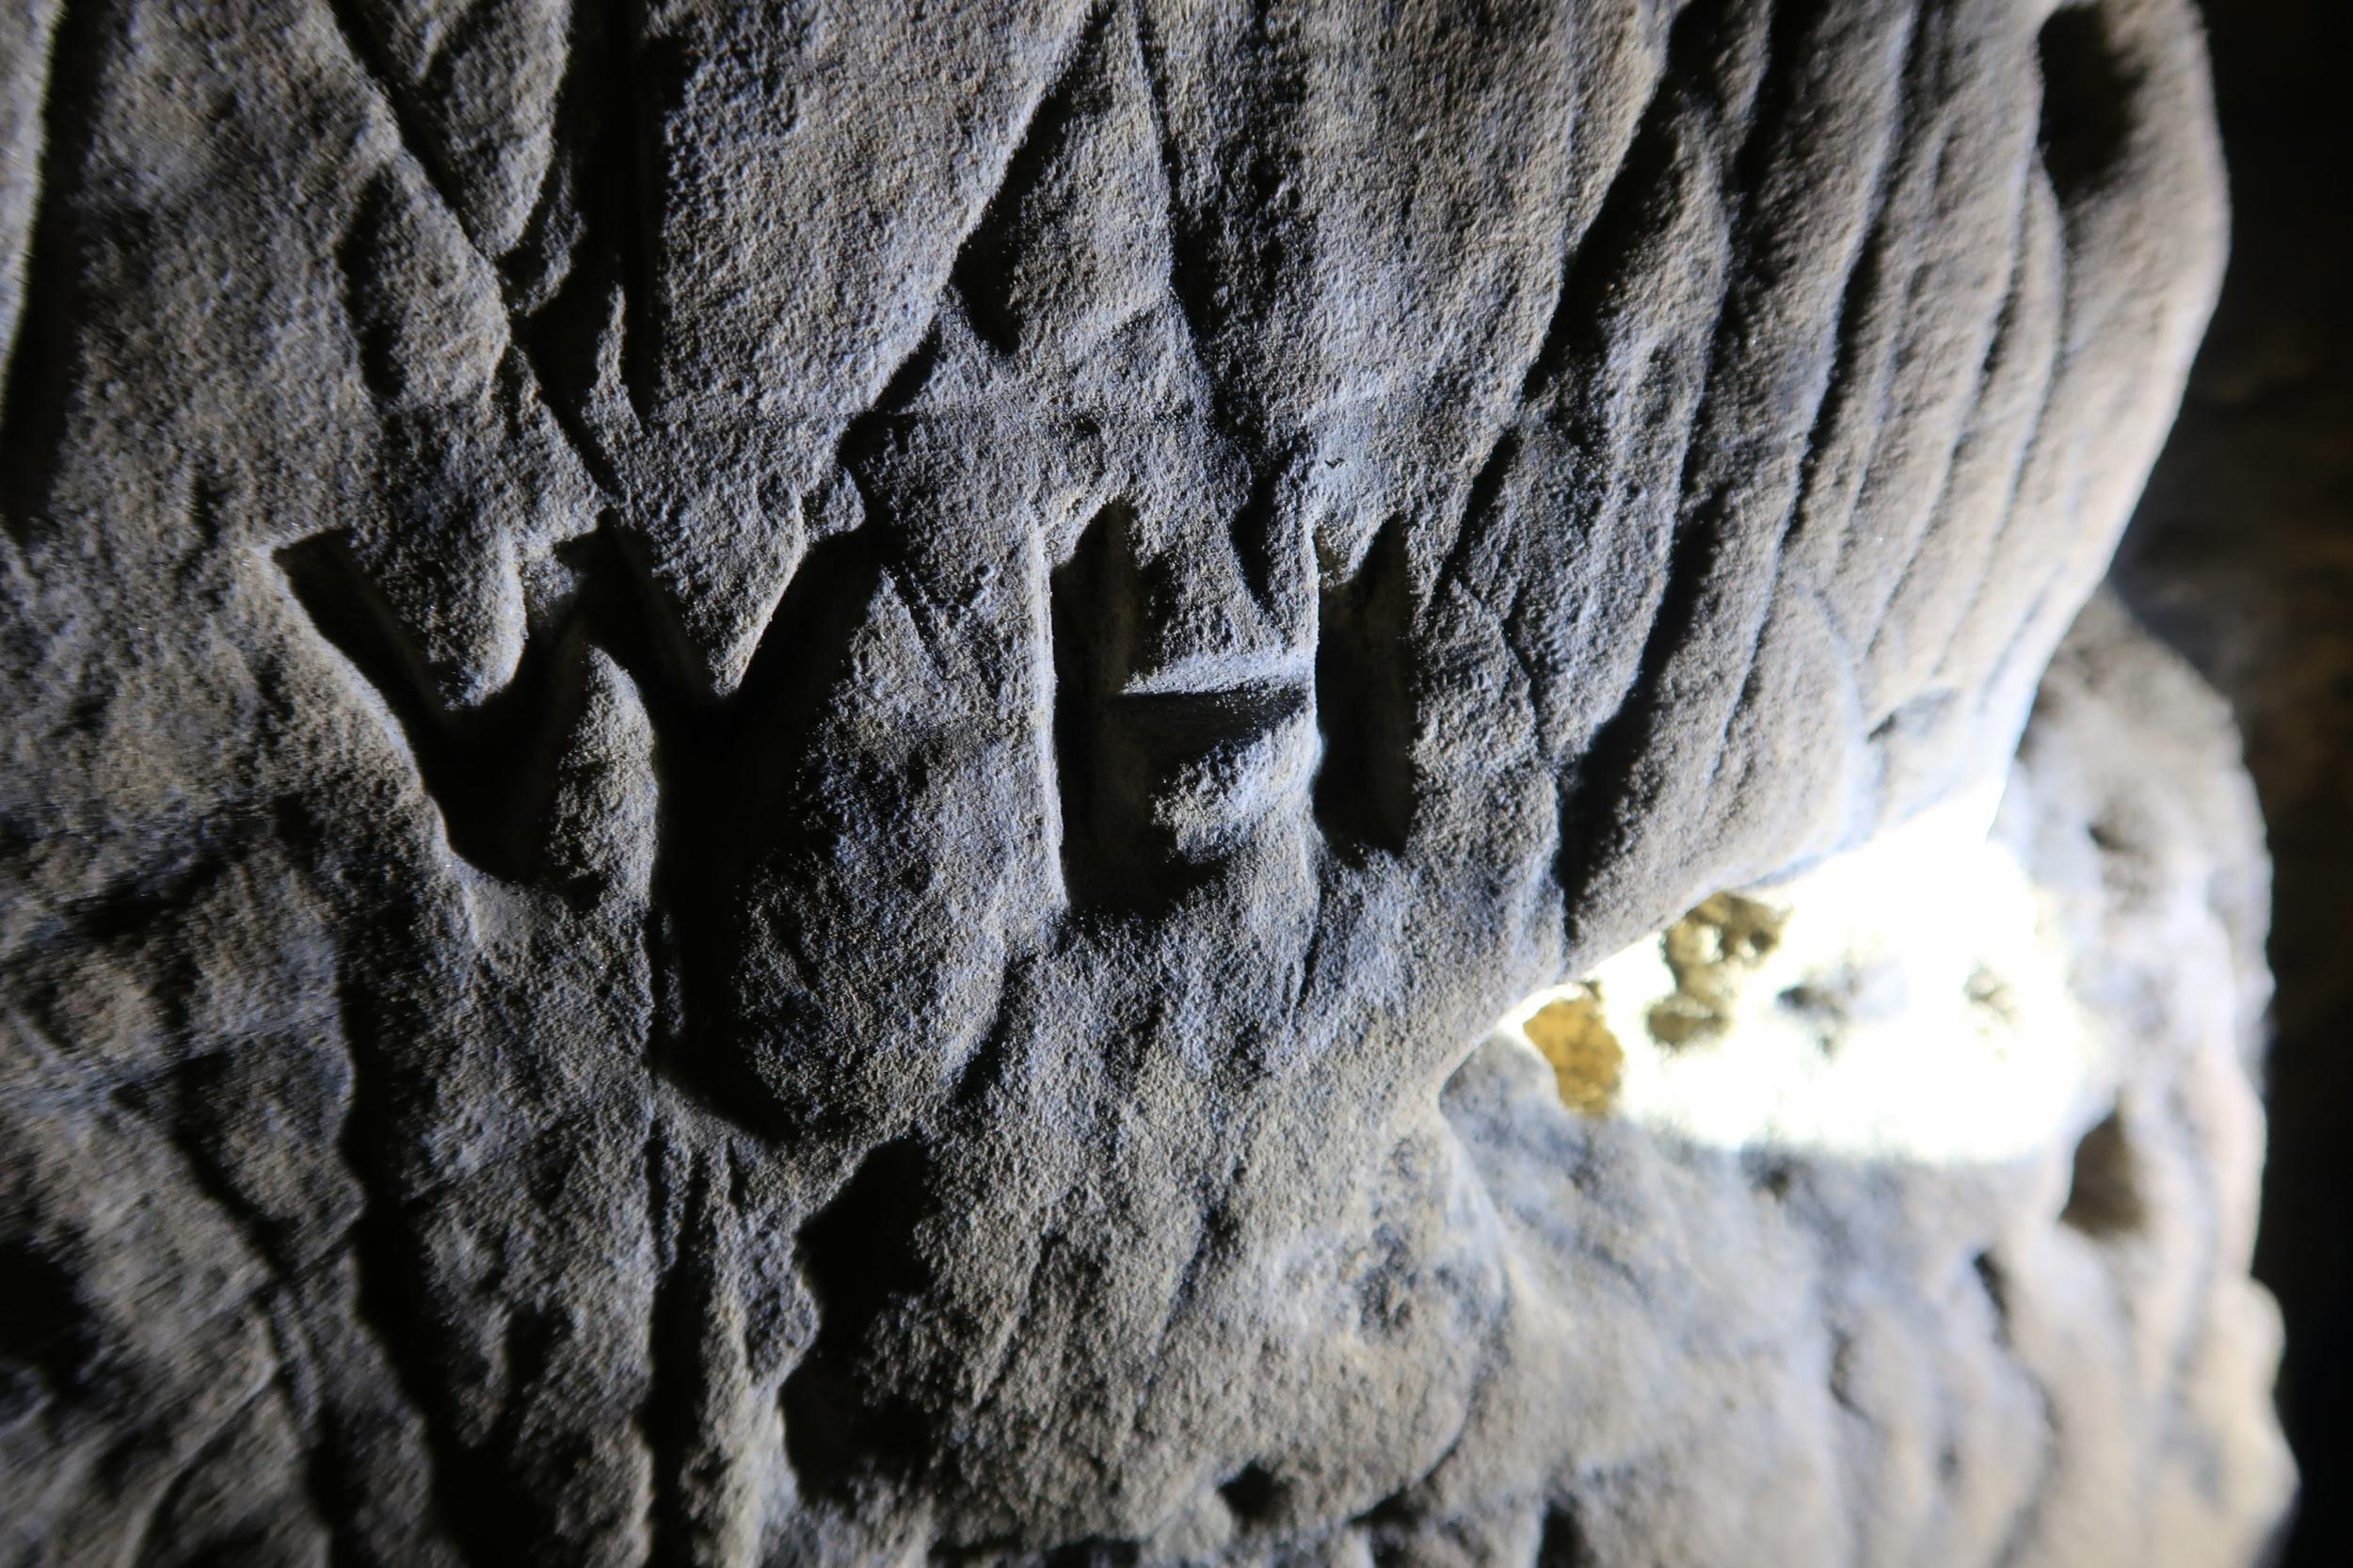 Anti-witch marks at Creswell Crags, Nottinghamshire